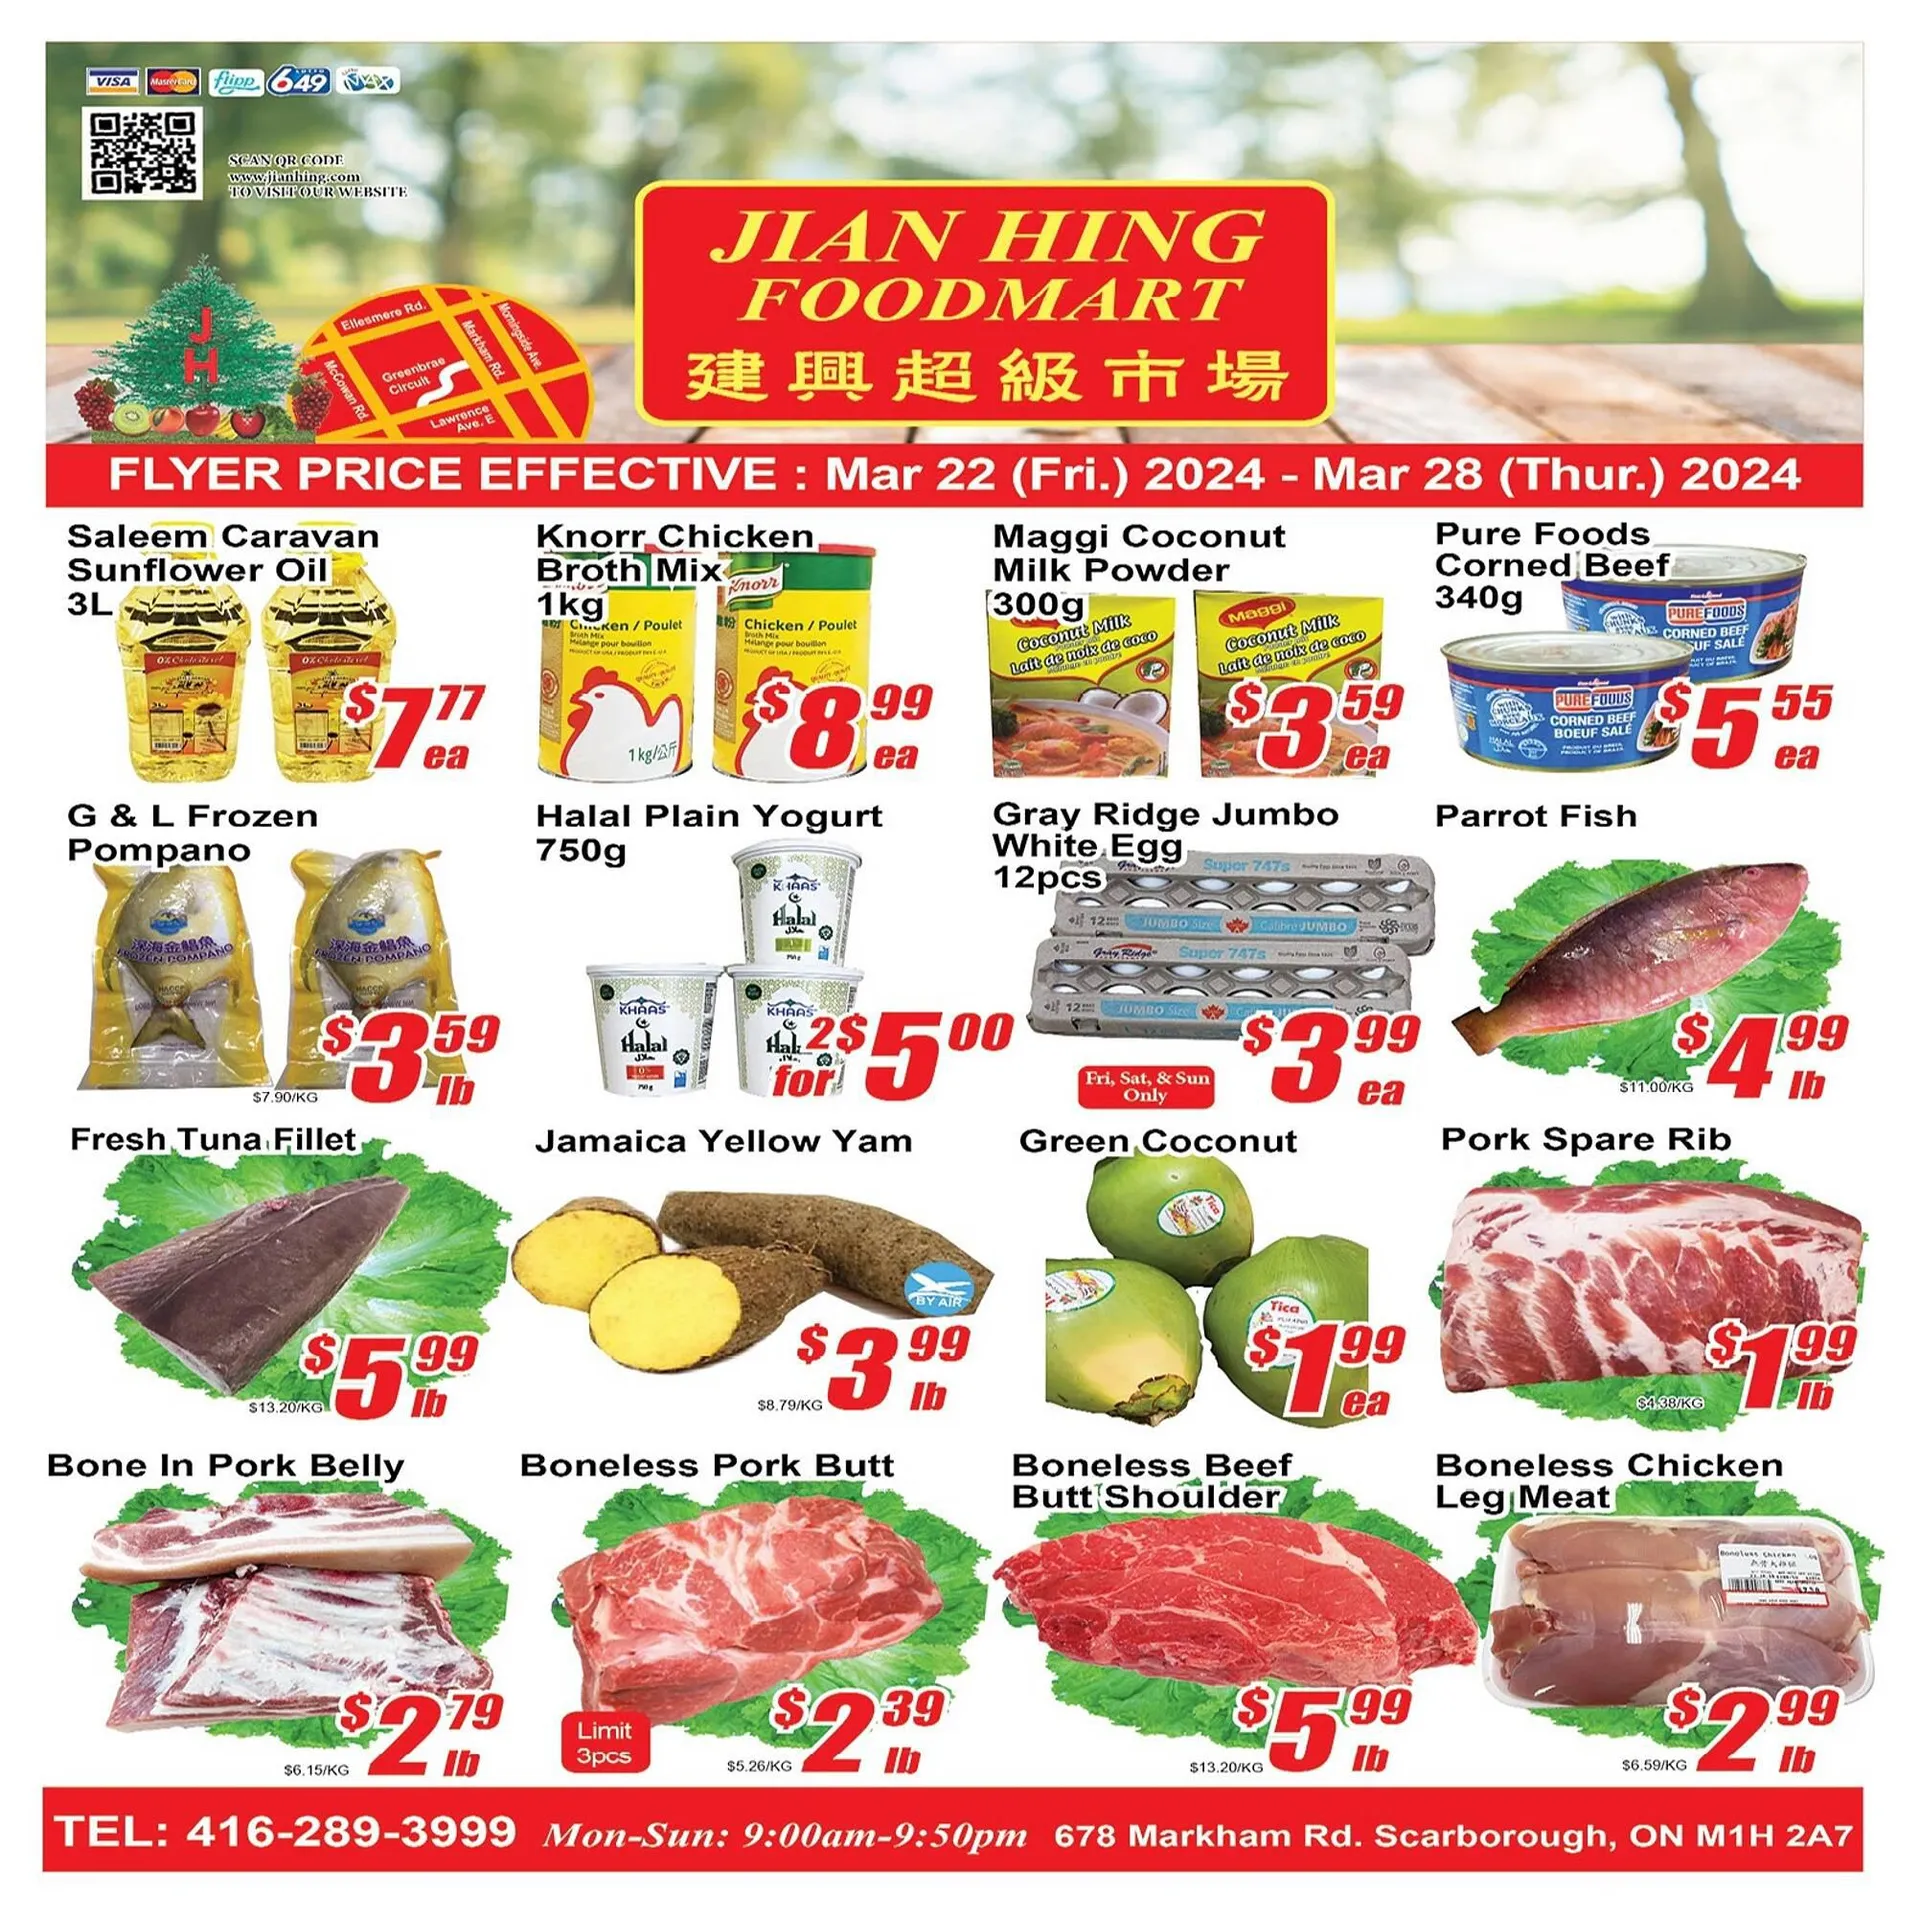 Jian Hing Supermarket flyer from March 21 to March 27 2024 - flyer page 